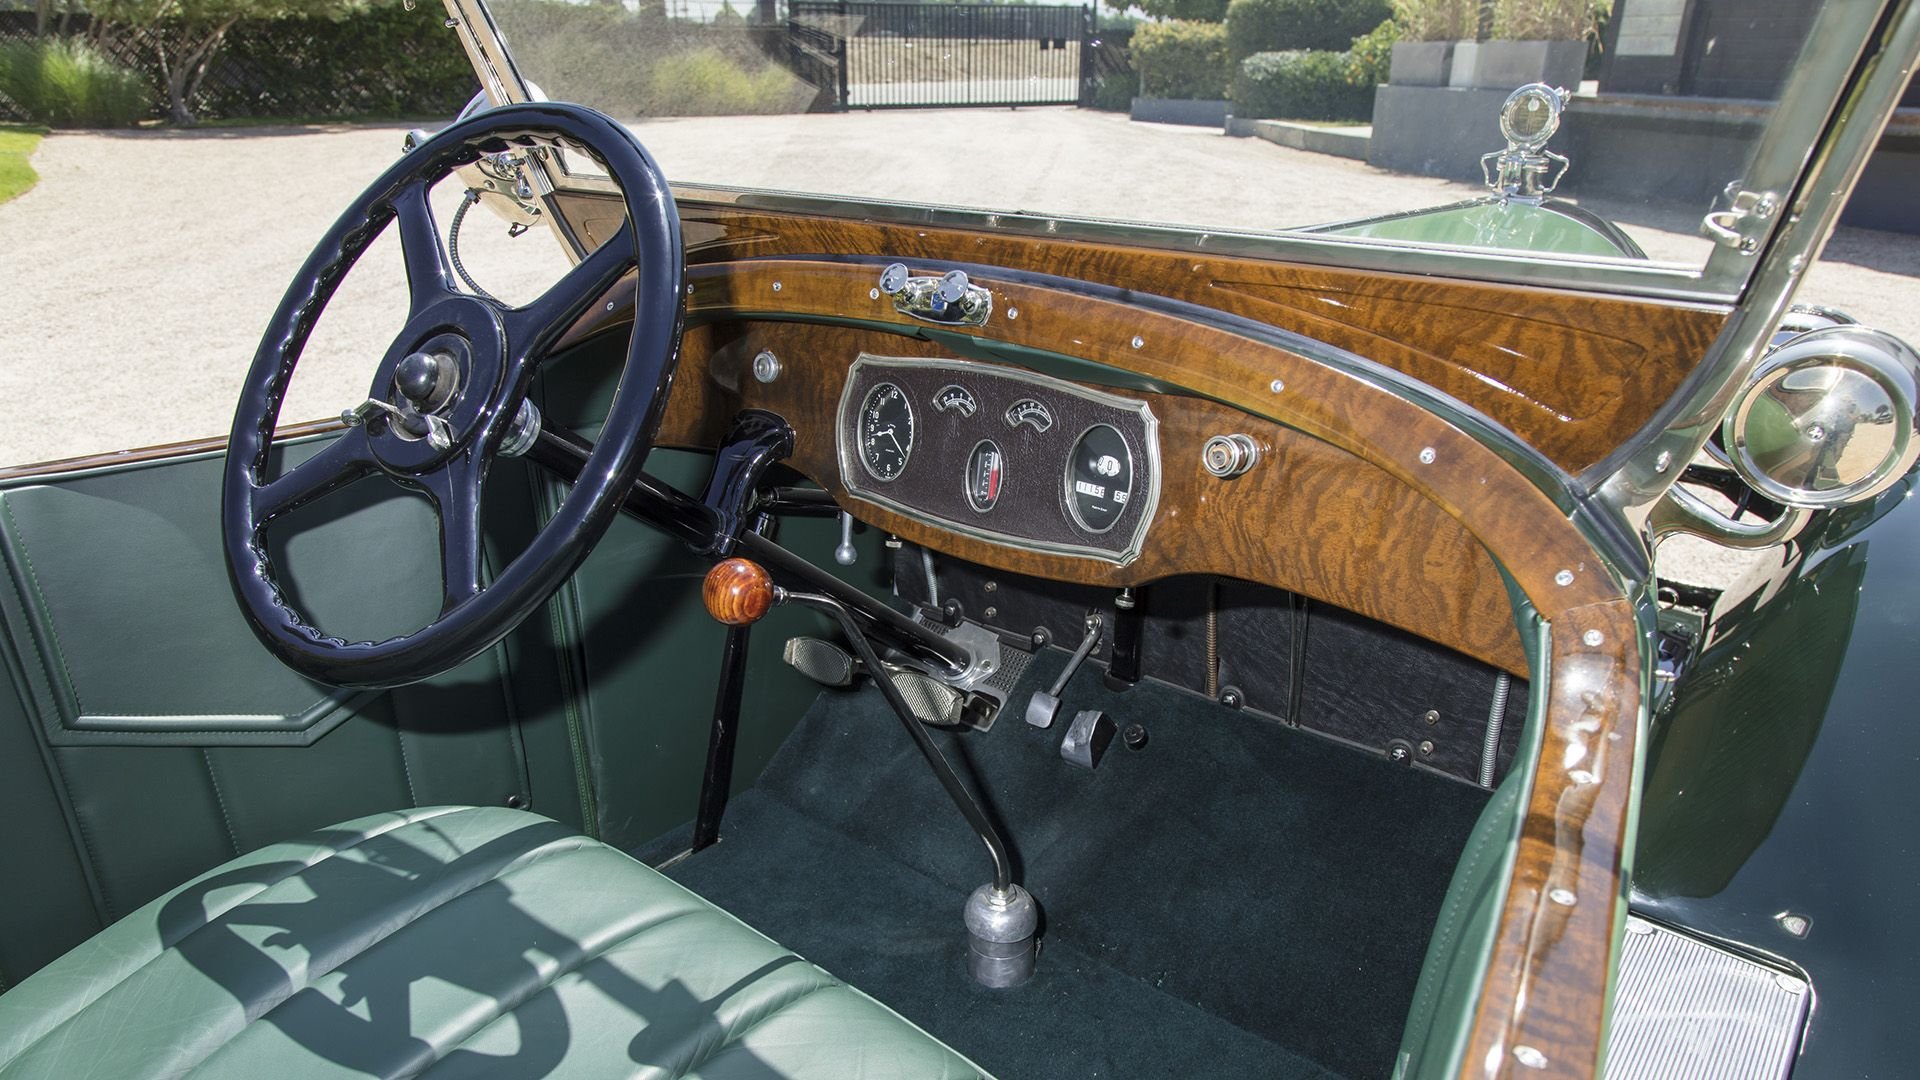 For Sale 1927 Packard Six Model 5-26 Runabout